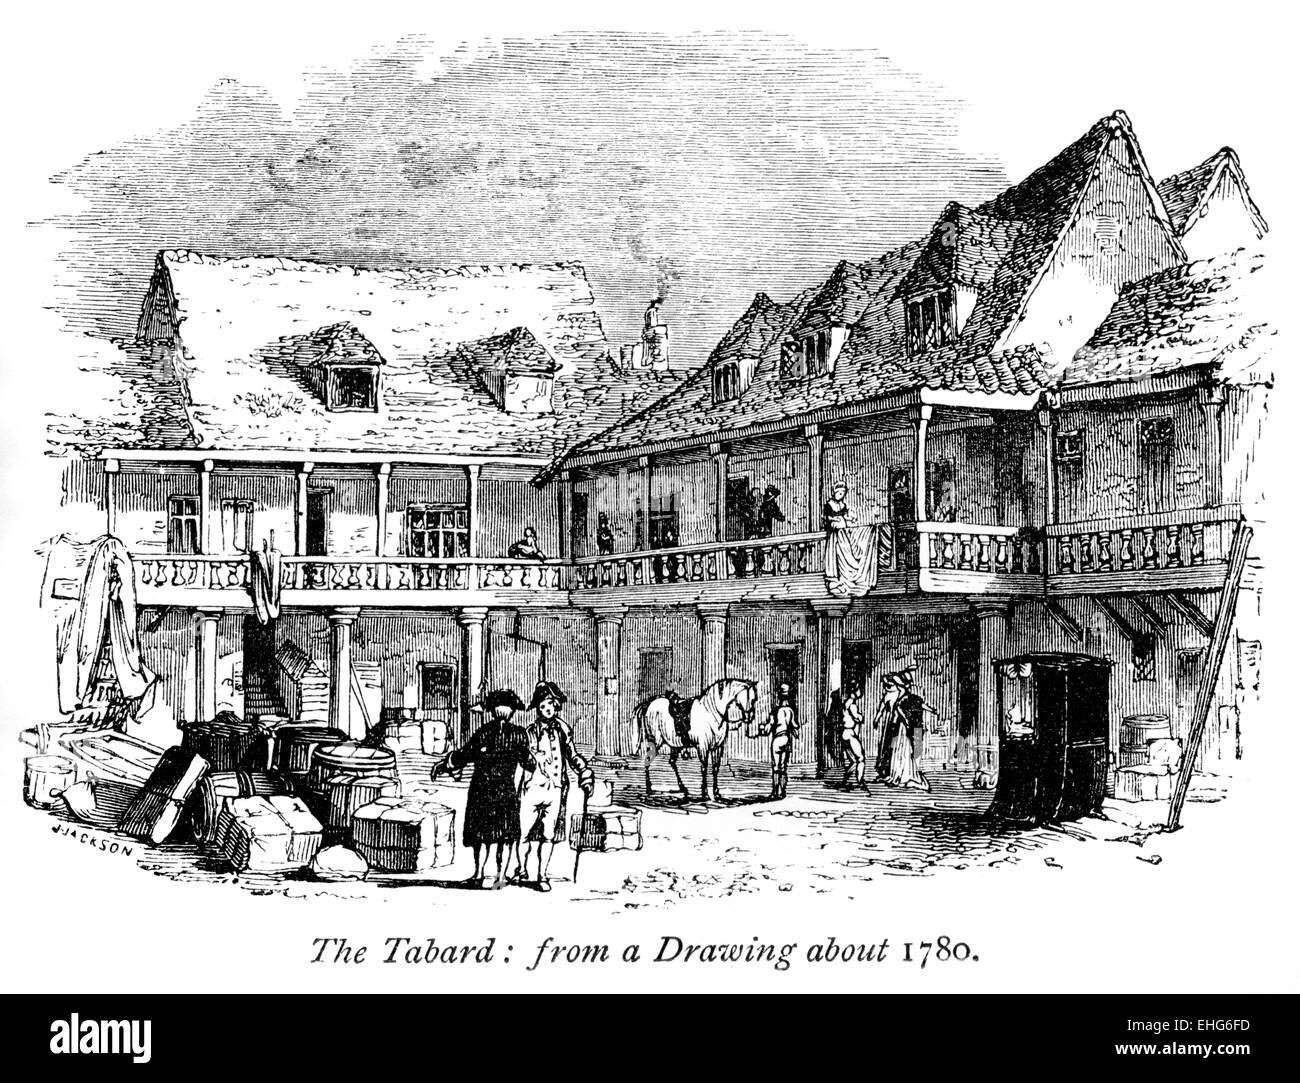 An engraving of The Tabard, Southwark, from a Drawing about 1780 scanned at high resolution from a book printed in 1867. Stock Photo